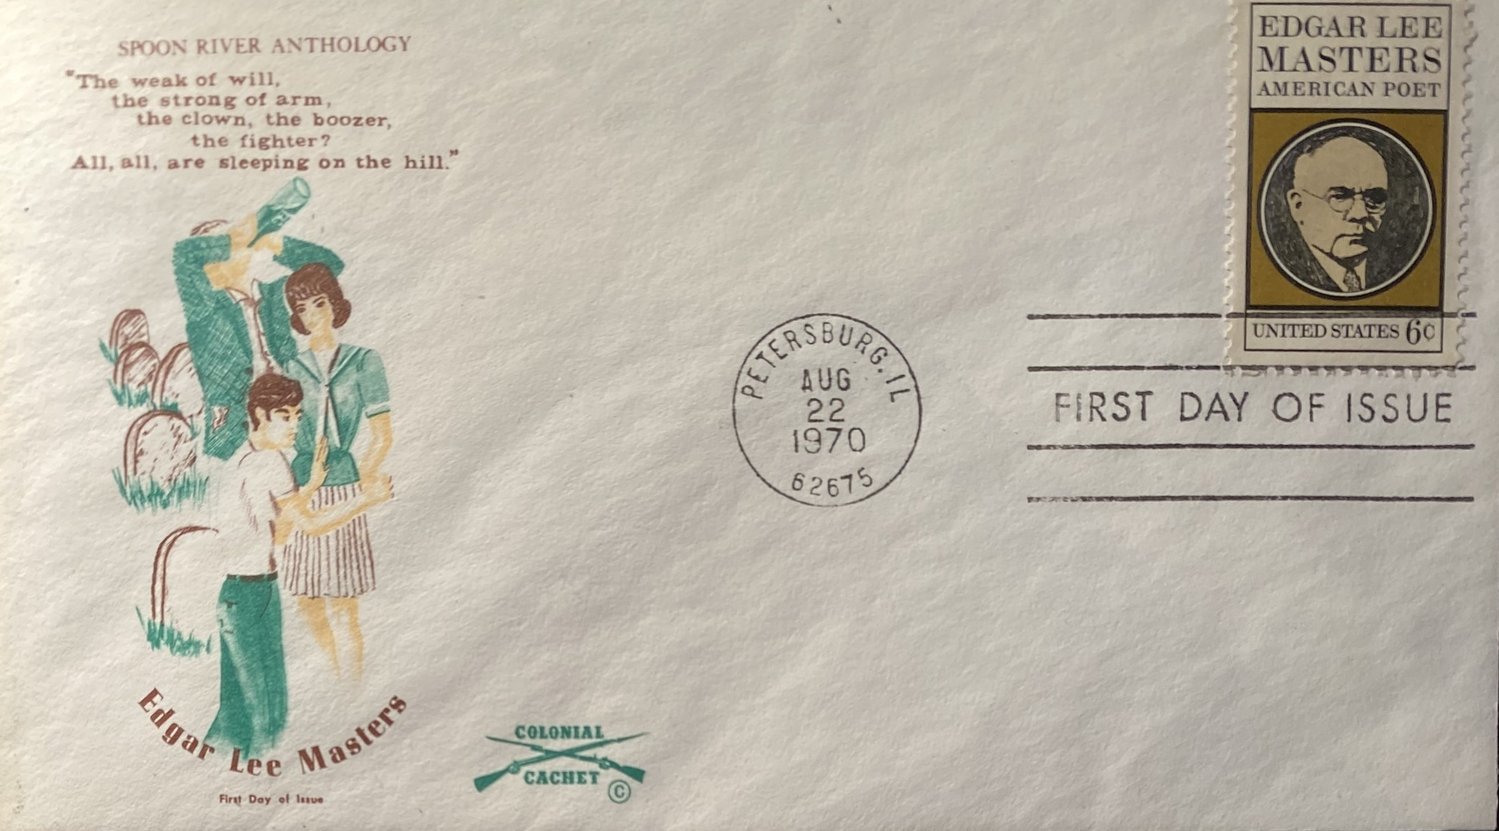 A stamp was issued in 1970 to honor author Edgar Lee Masters as Spoon River Anthology was being banned in his home town.